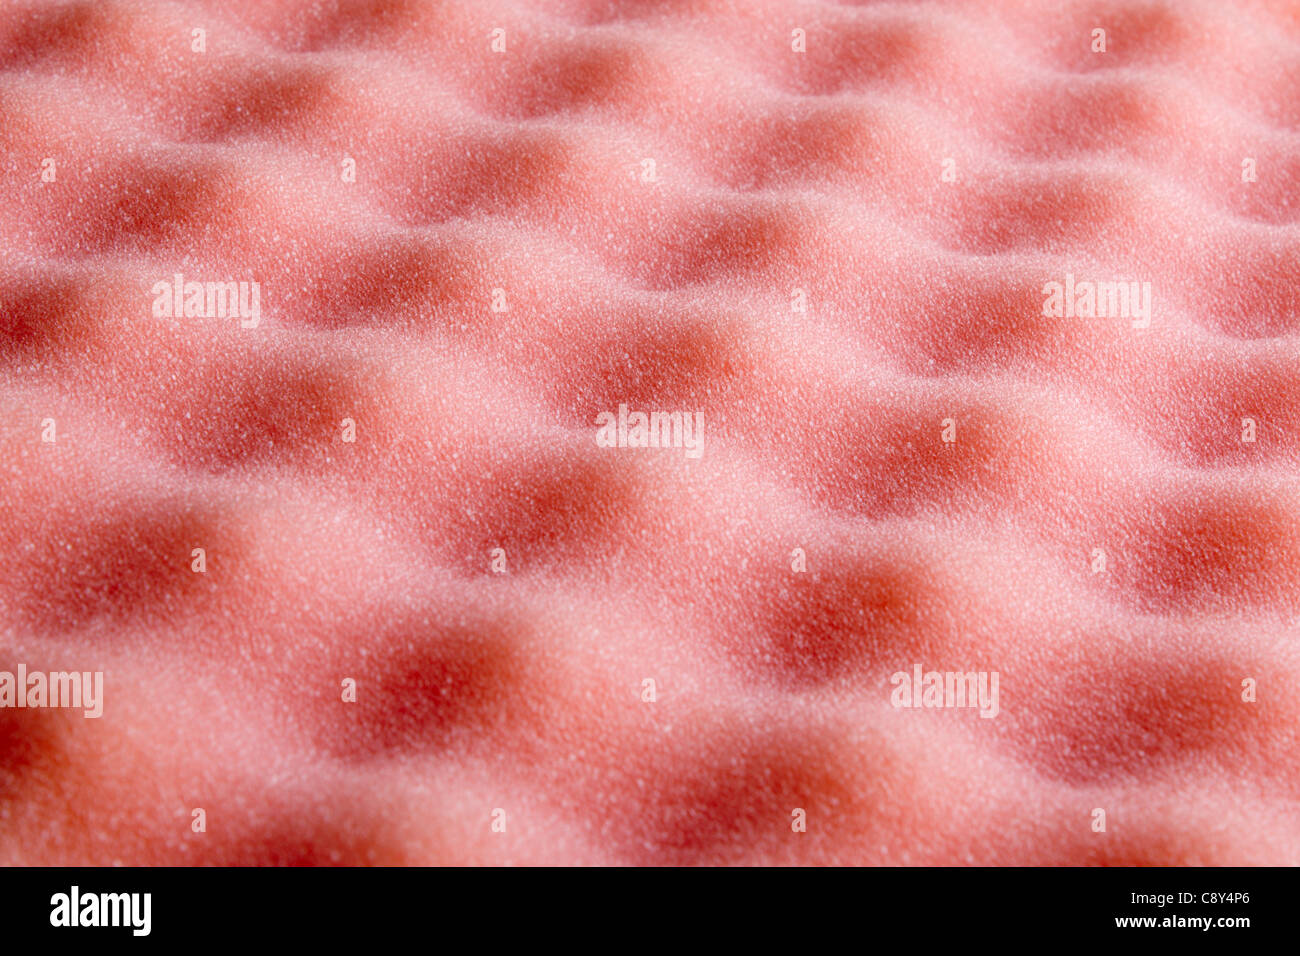 Foam rubber of pink color forms a relief Stock Photo